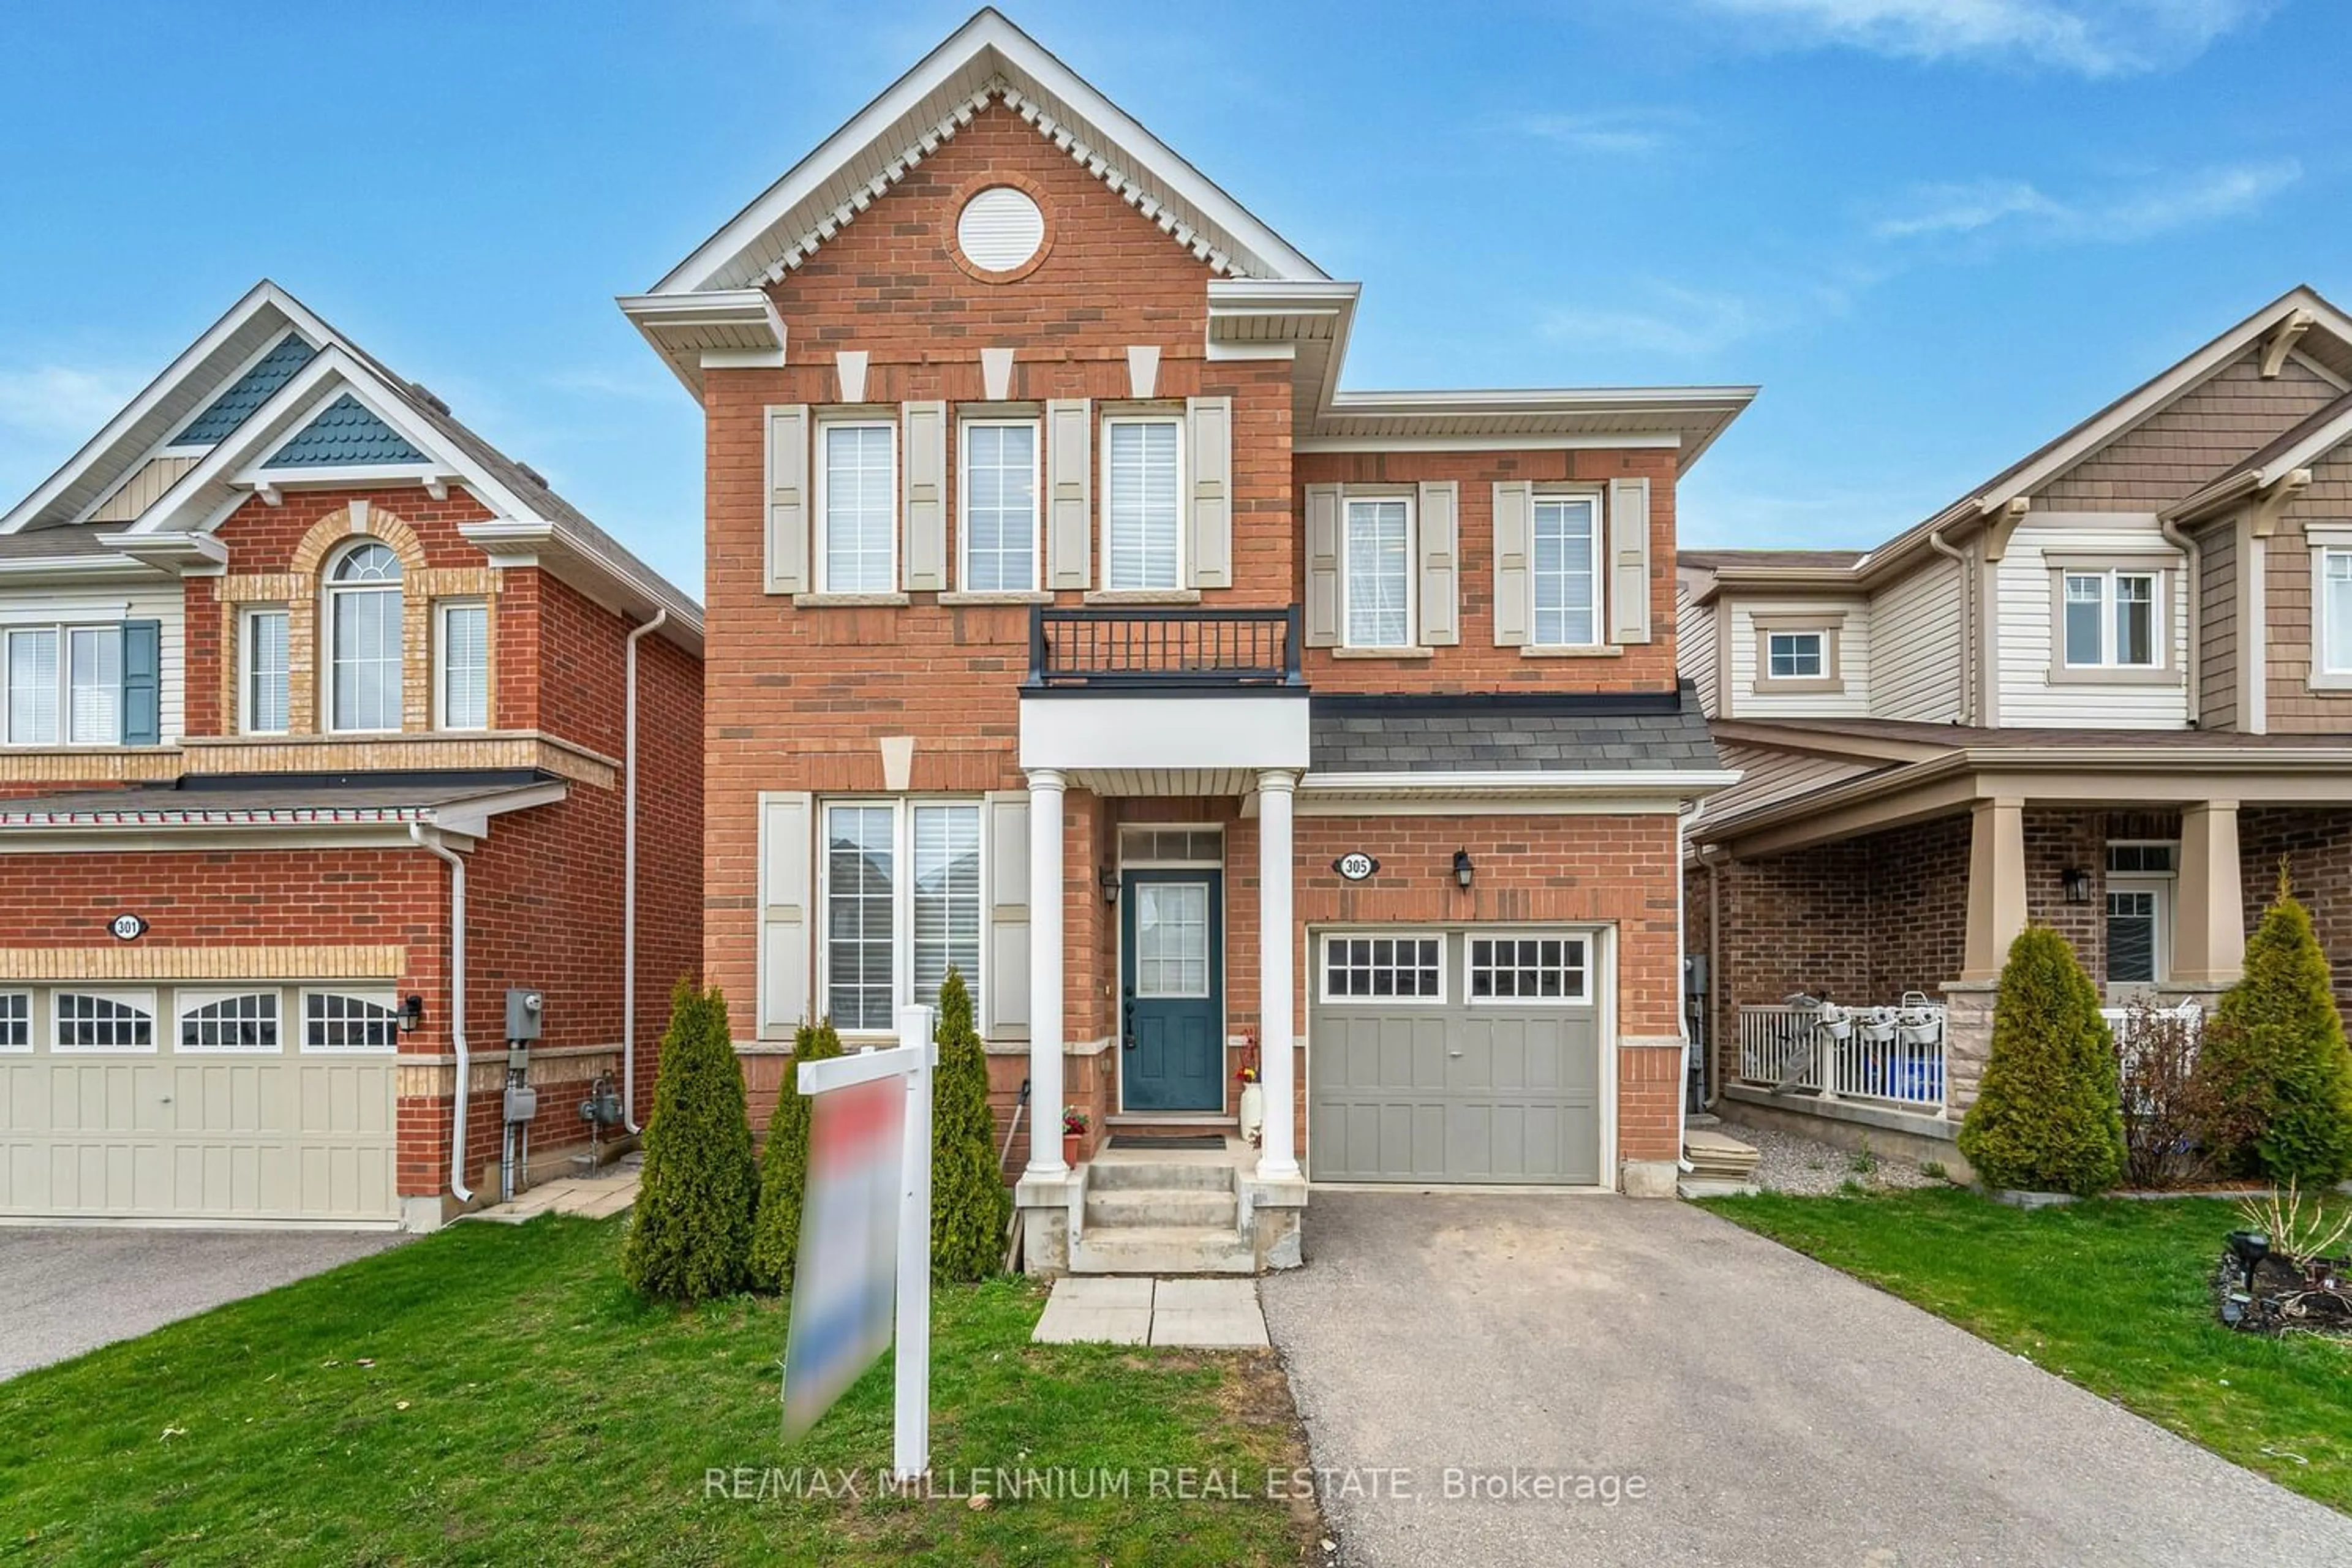 Home with brick exterior material for 305 Trudeau Dr, Milton Ontario L9T 8X9